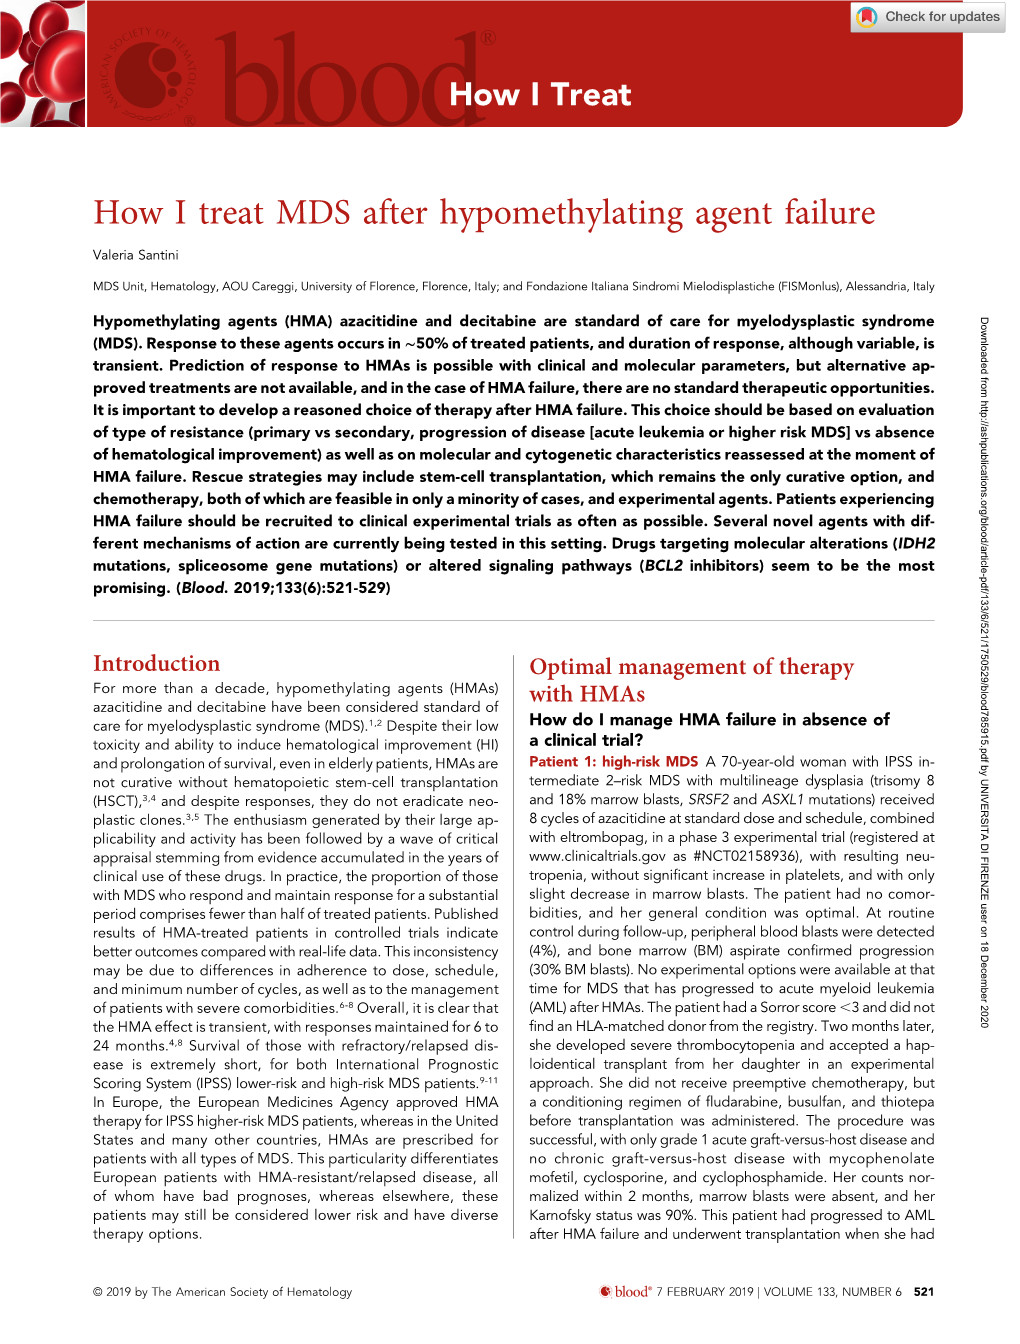 How I Treat MDS After Hypomethylating Agent Failure